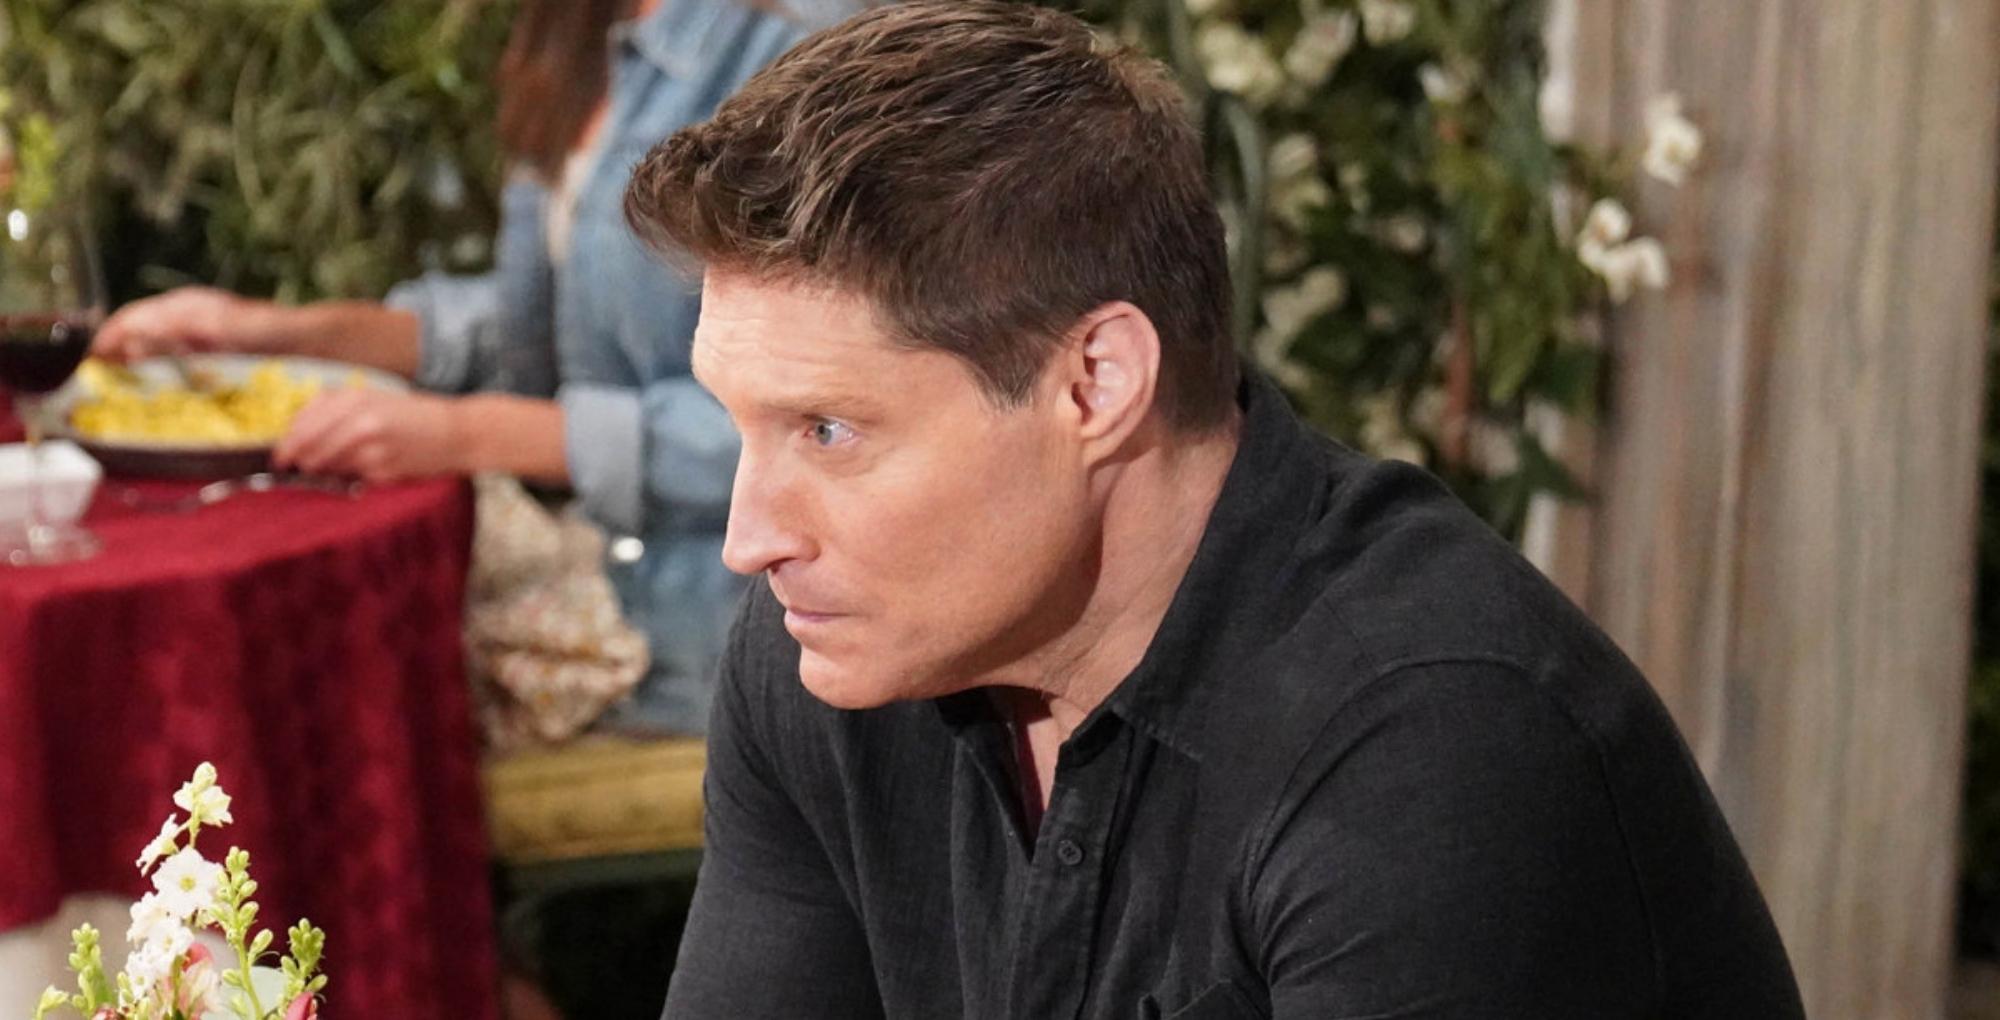 the bold and the beautiful spoilers for june 1 have deacon sharpe at his restaurant.